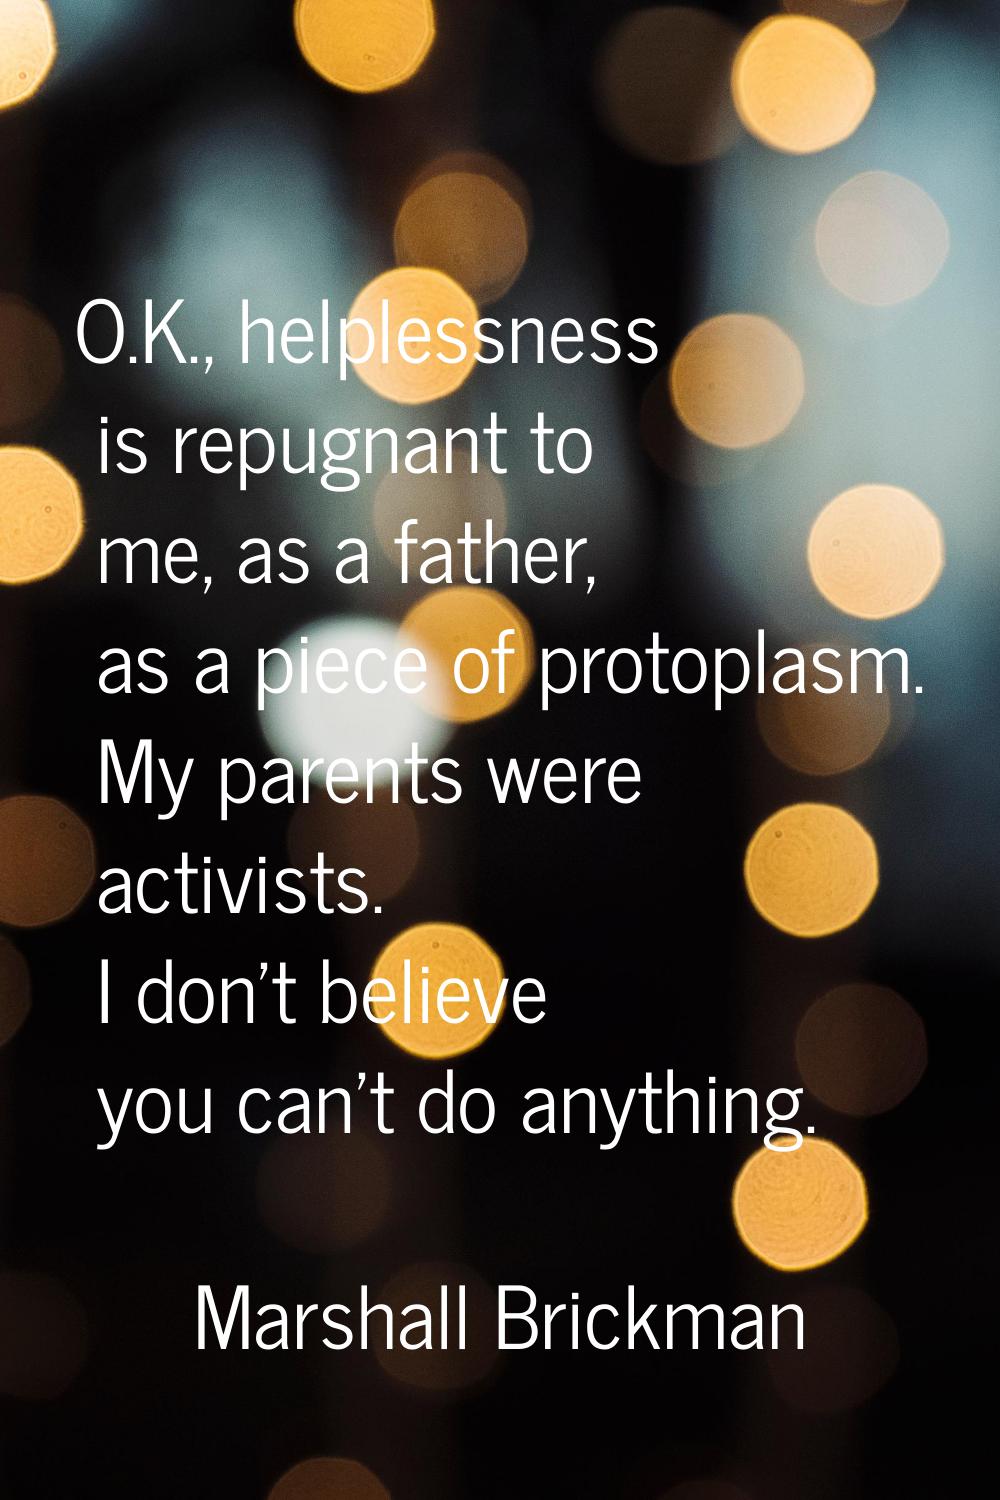 O.K., helplessness is repugnant to me, as a father, as a piece of protoplasm. My parents were activ